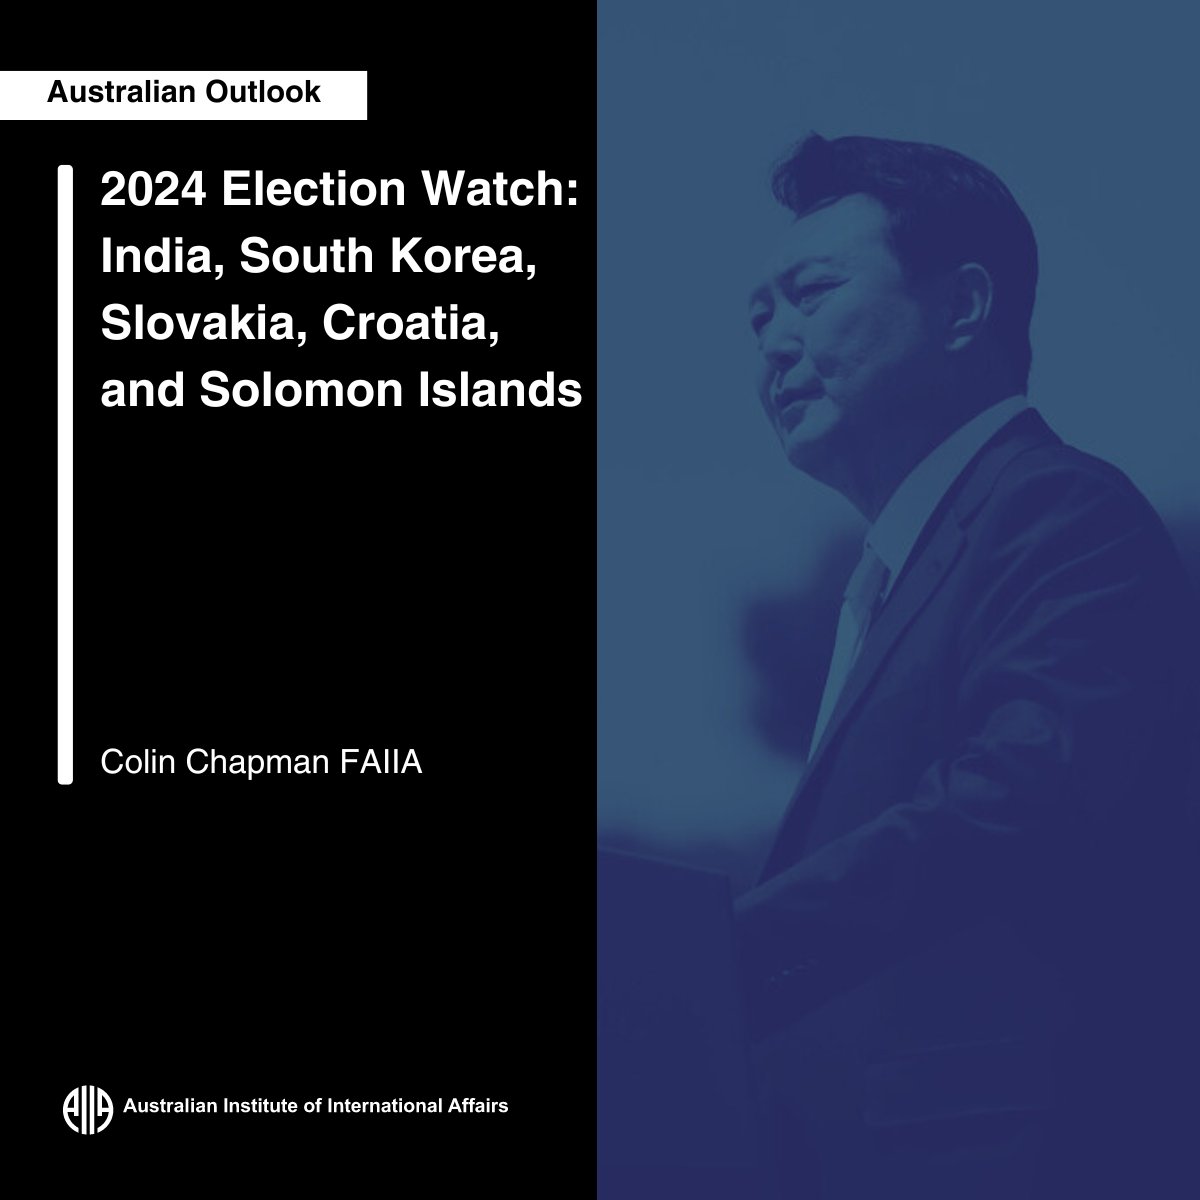 “A further deepening of far right forces in Croatia, Slovakia, and India...Meanwhile, in the Republic of Korea, President Yoon Suk Yeol faces a determined opposition,” discussed by Colin Chapman FAIIA Read more at Australian Outlook👇 ow.ly/kmfF50RkMwm